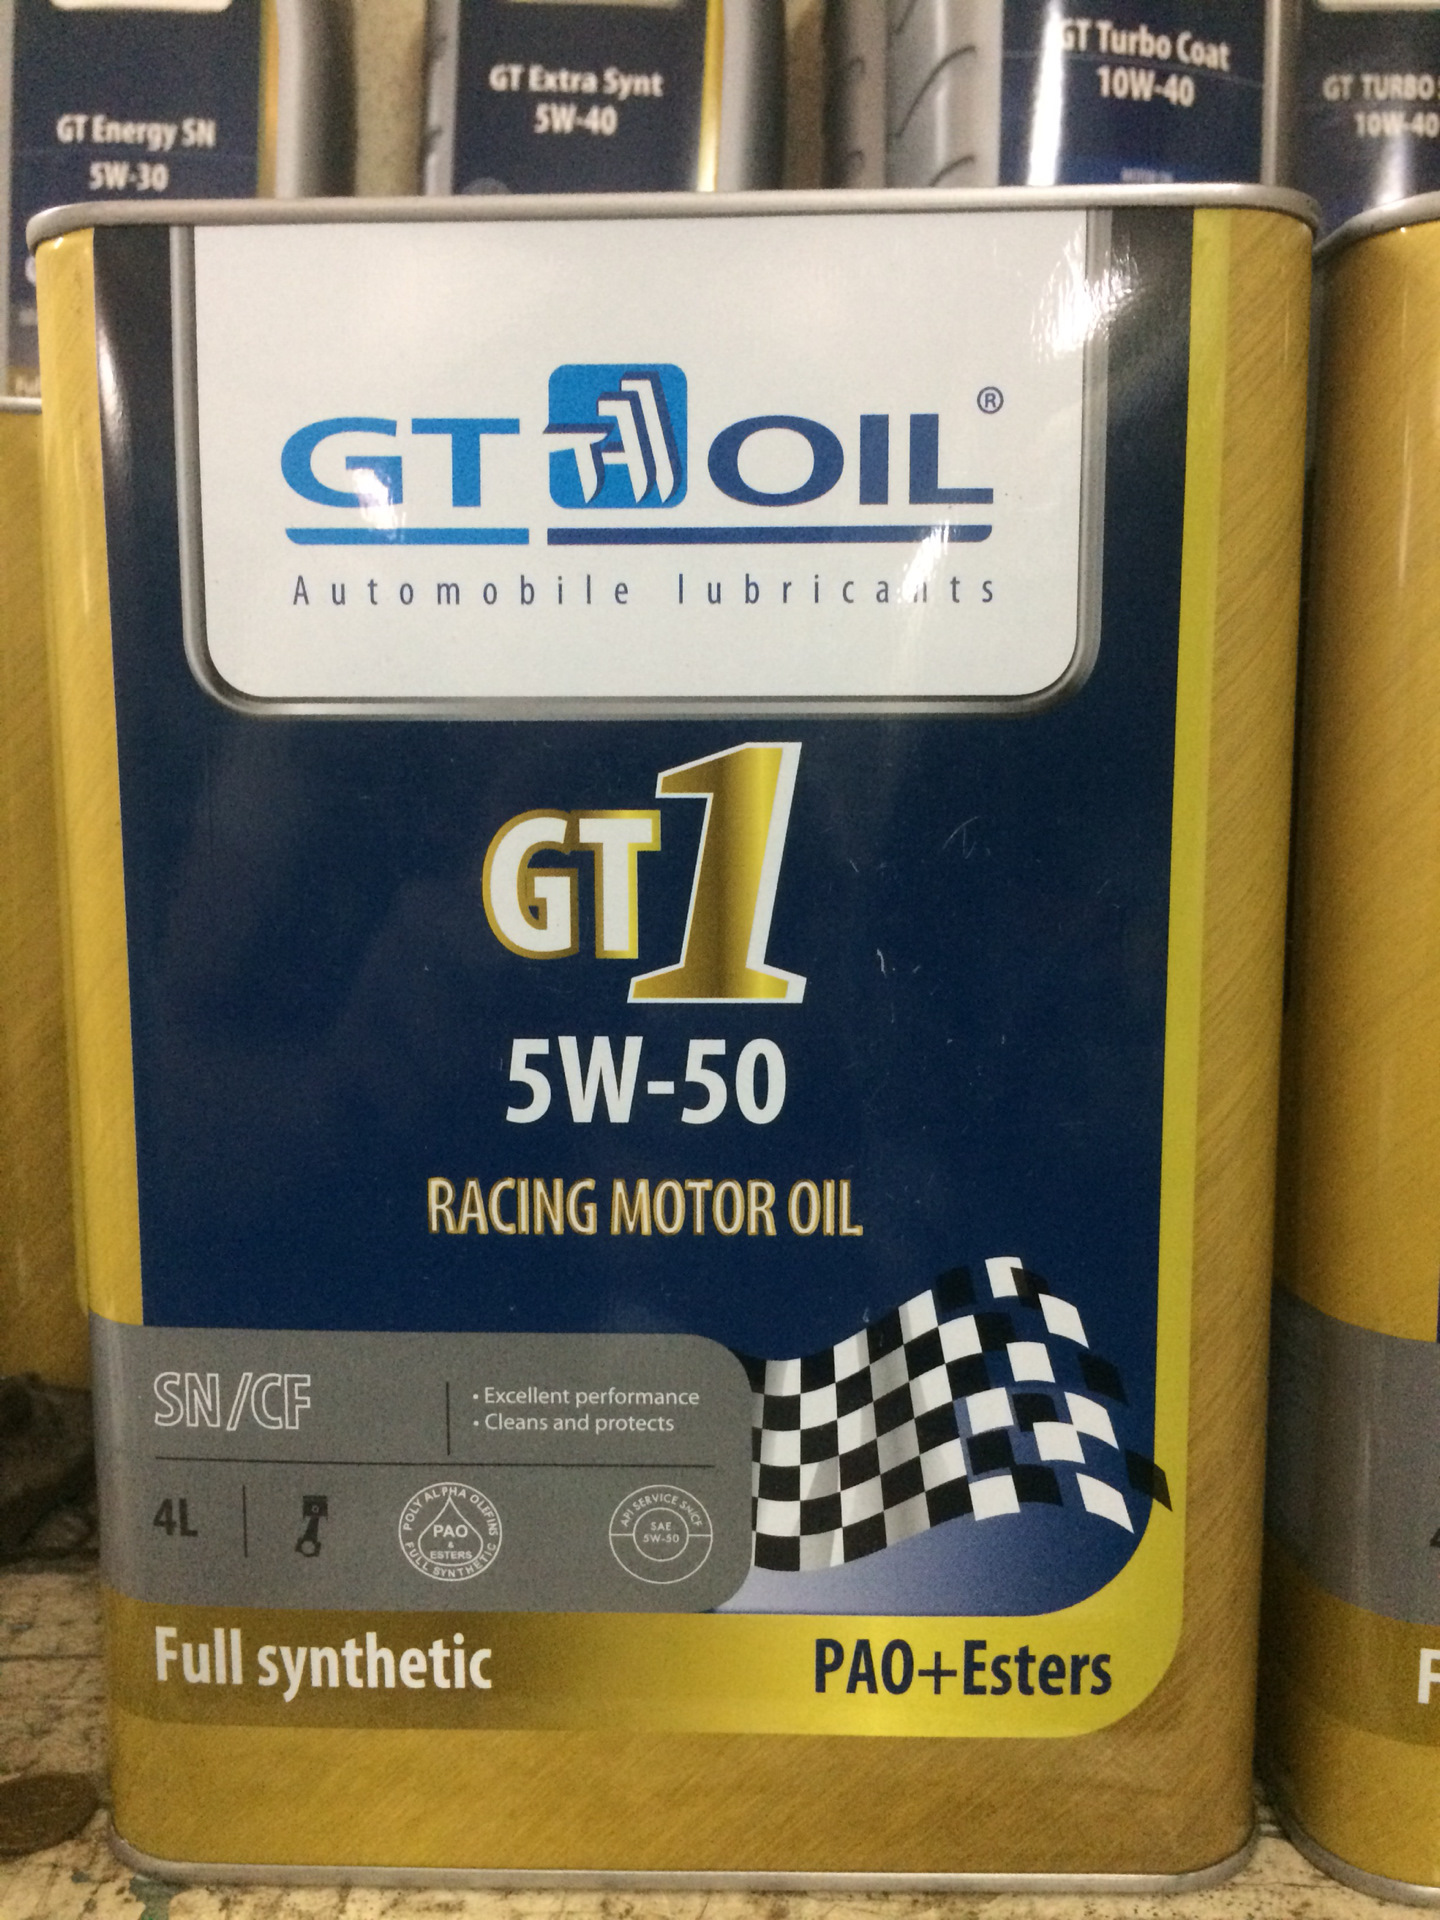 Масло gt energy. Gt Oil 5w40 Extra Synt. Gt Oil 5w40 body 955. Масло gt Oil 5w40 артикул. Gt Oil gt Max Energy 5w-40.